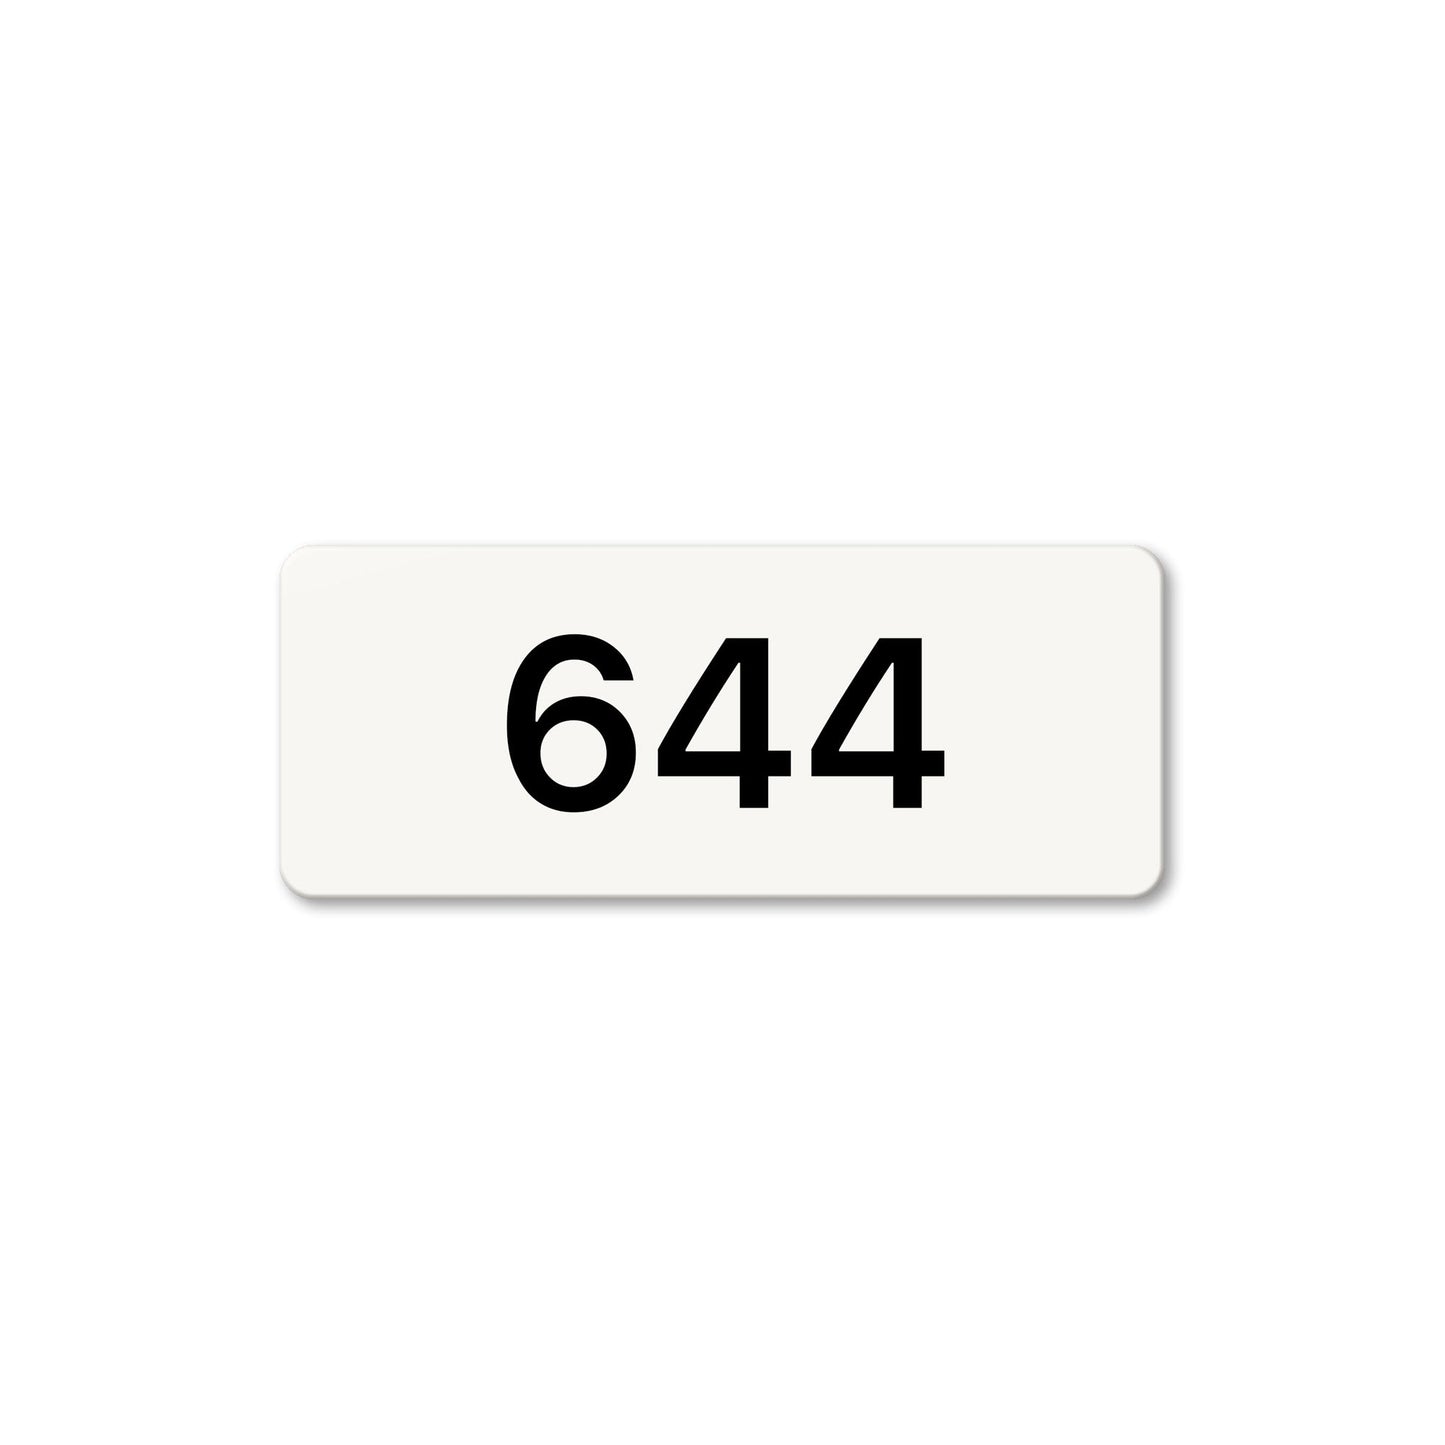 Numeral 644